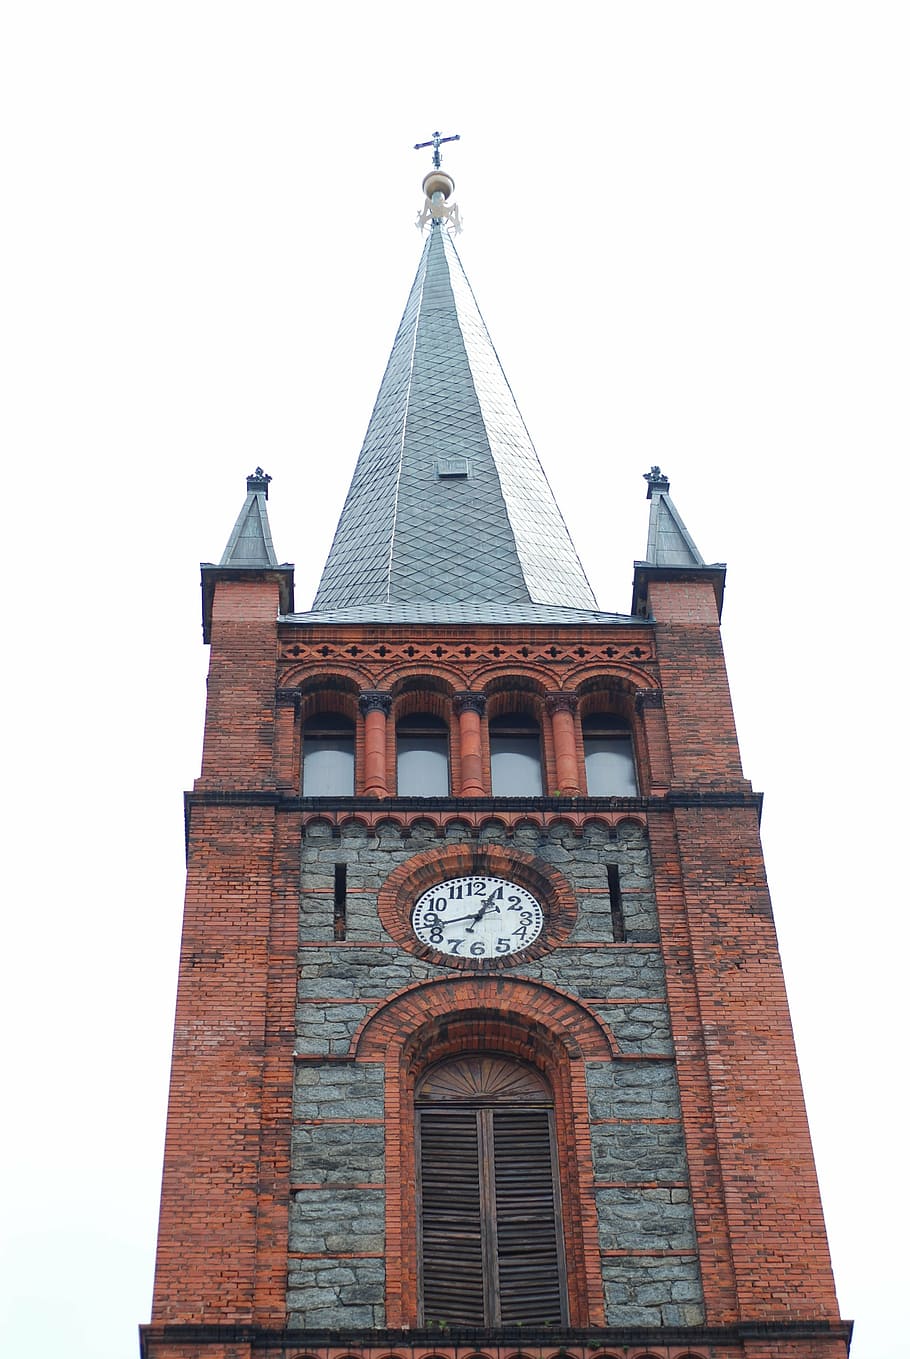 clock tower, the church tower, tower, monument, clock, sacred building, red brick, church, architecture, built structure